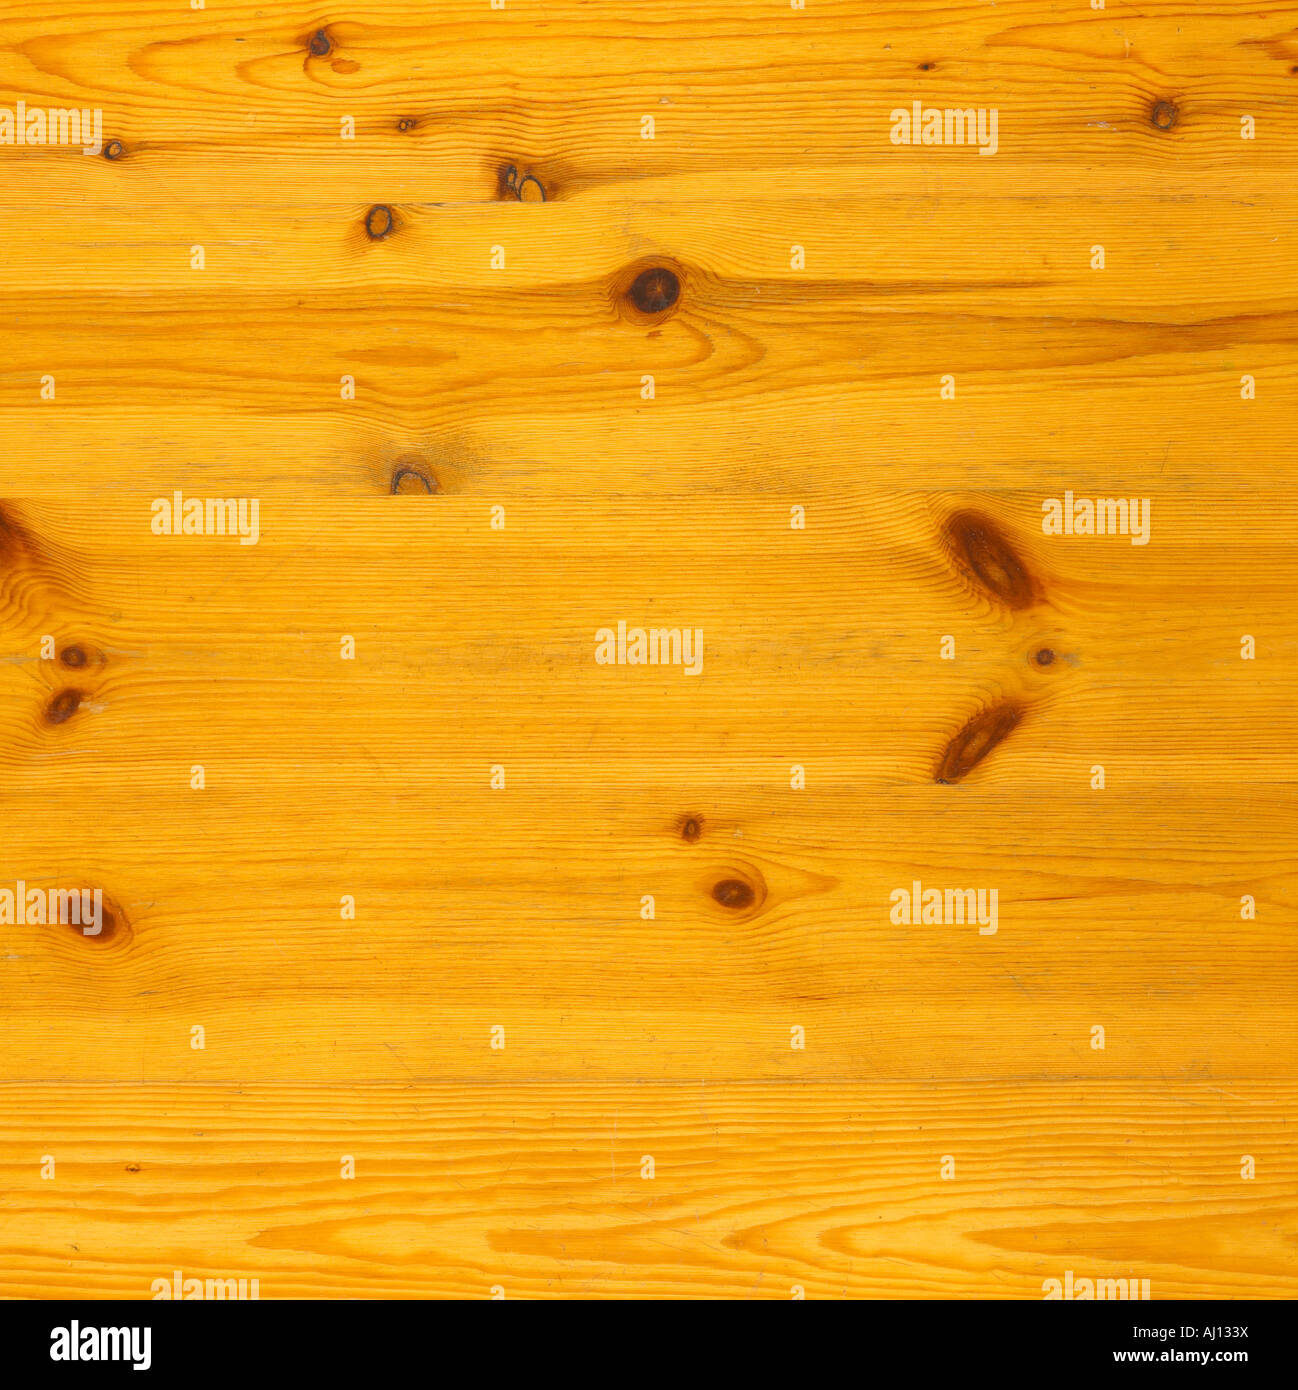 LIGHT BROWN ABSTRACT TIMBER PINE WOOD BACKGROUND Stock Photo